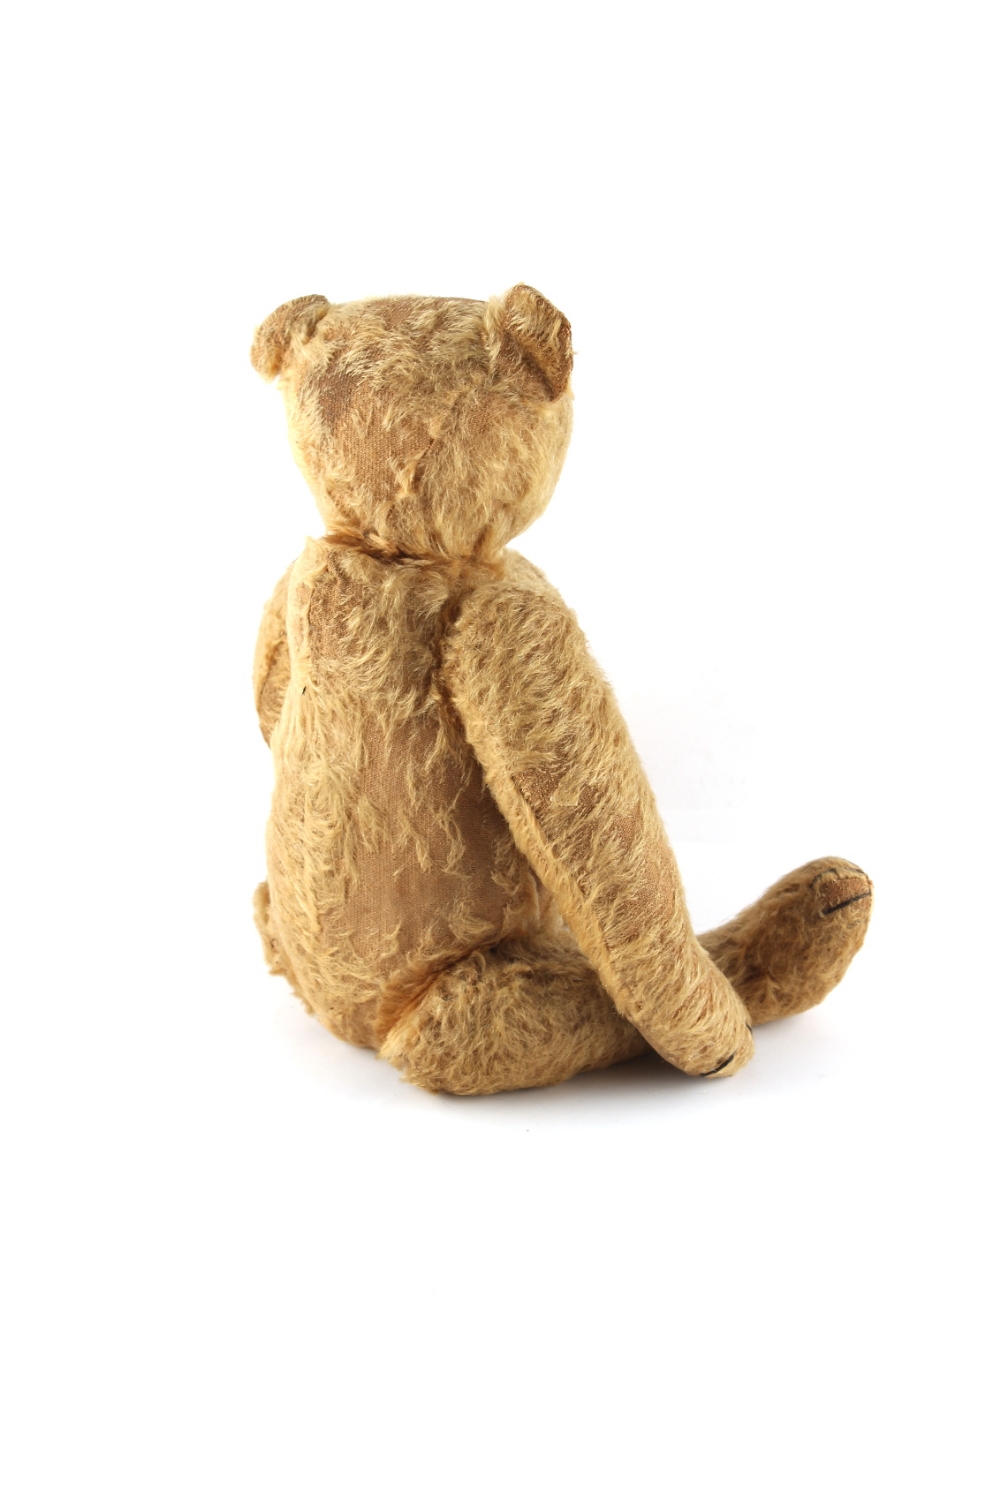 Property of a lady - an early 20th century teddy bear, circa 1905, with worn mohair, long muzzle & - Image 3 of 3